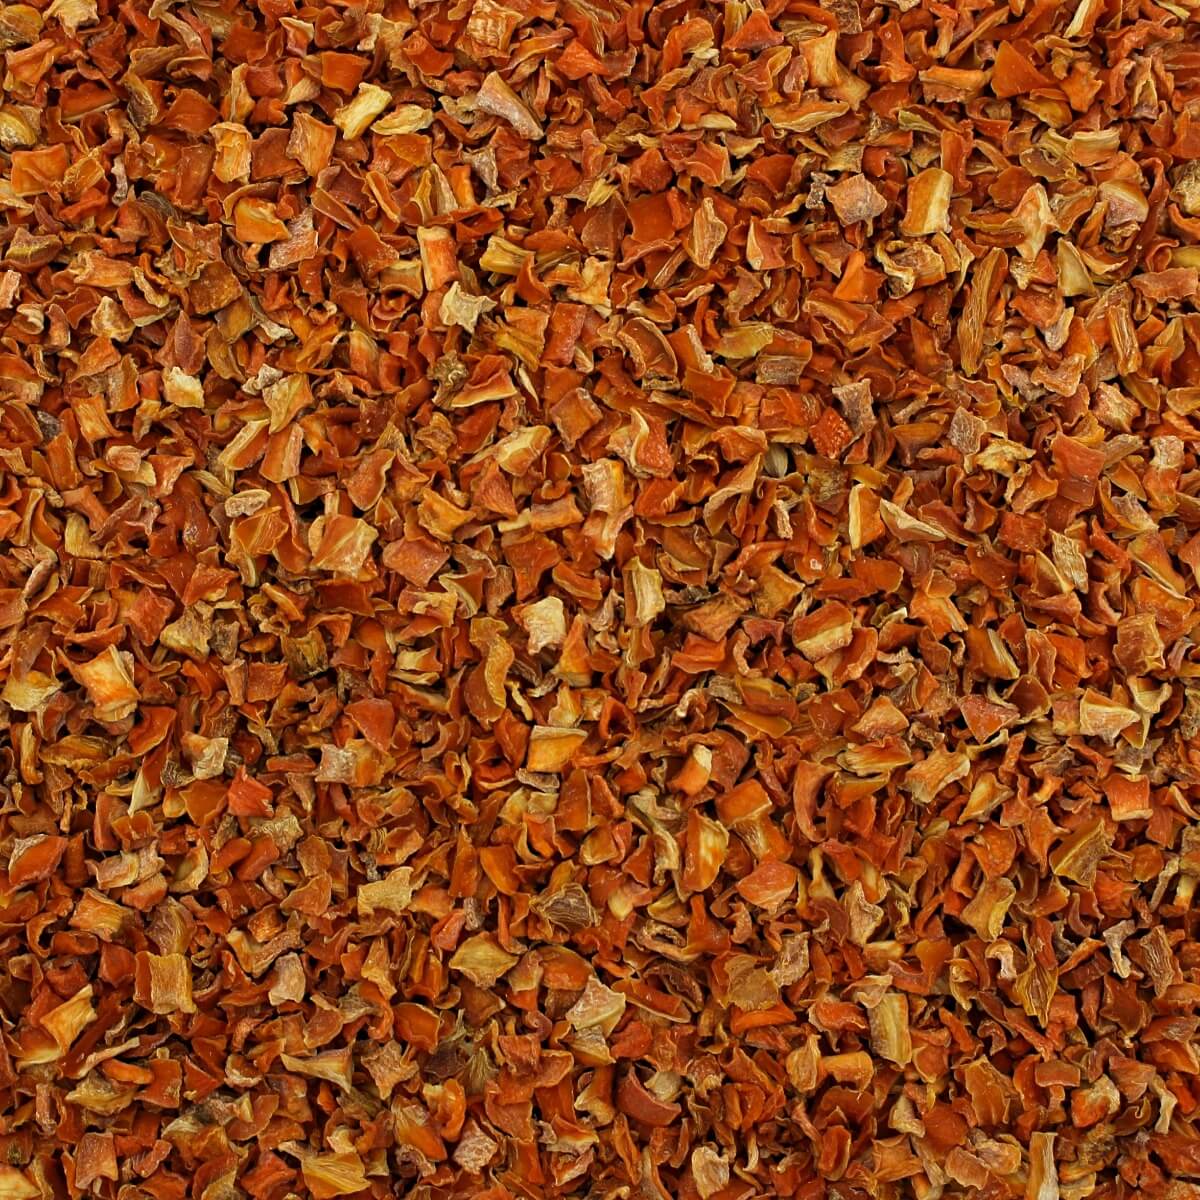 A close up image of a pile of dried red peppers available in Harmony House Organic Vegetable Pantry Stuffer.